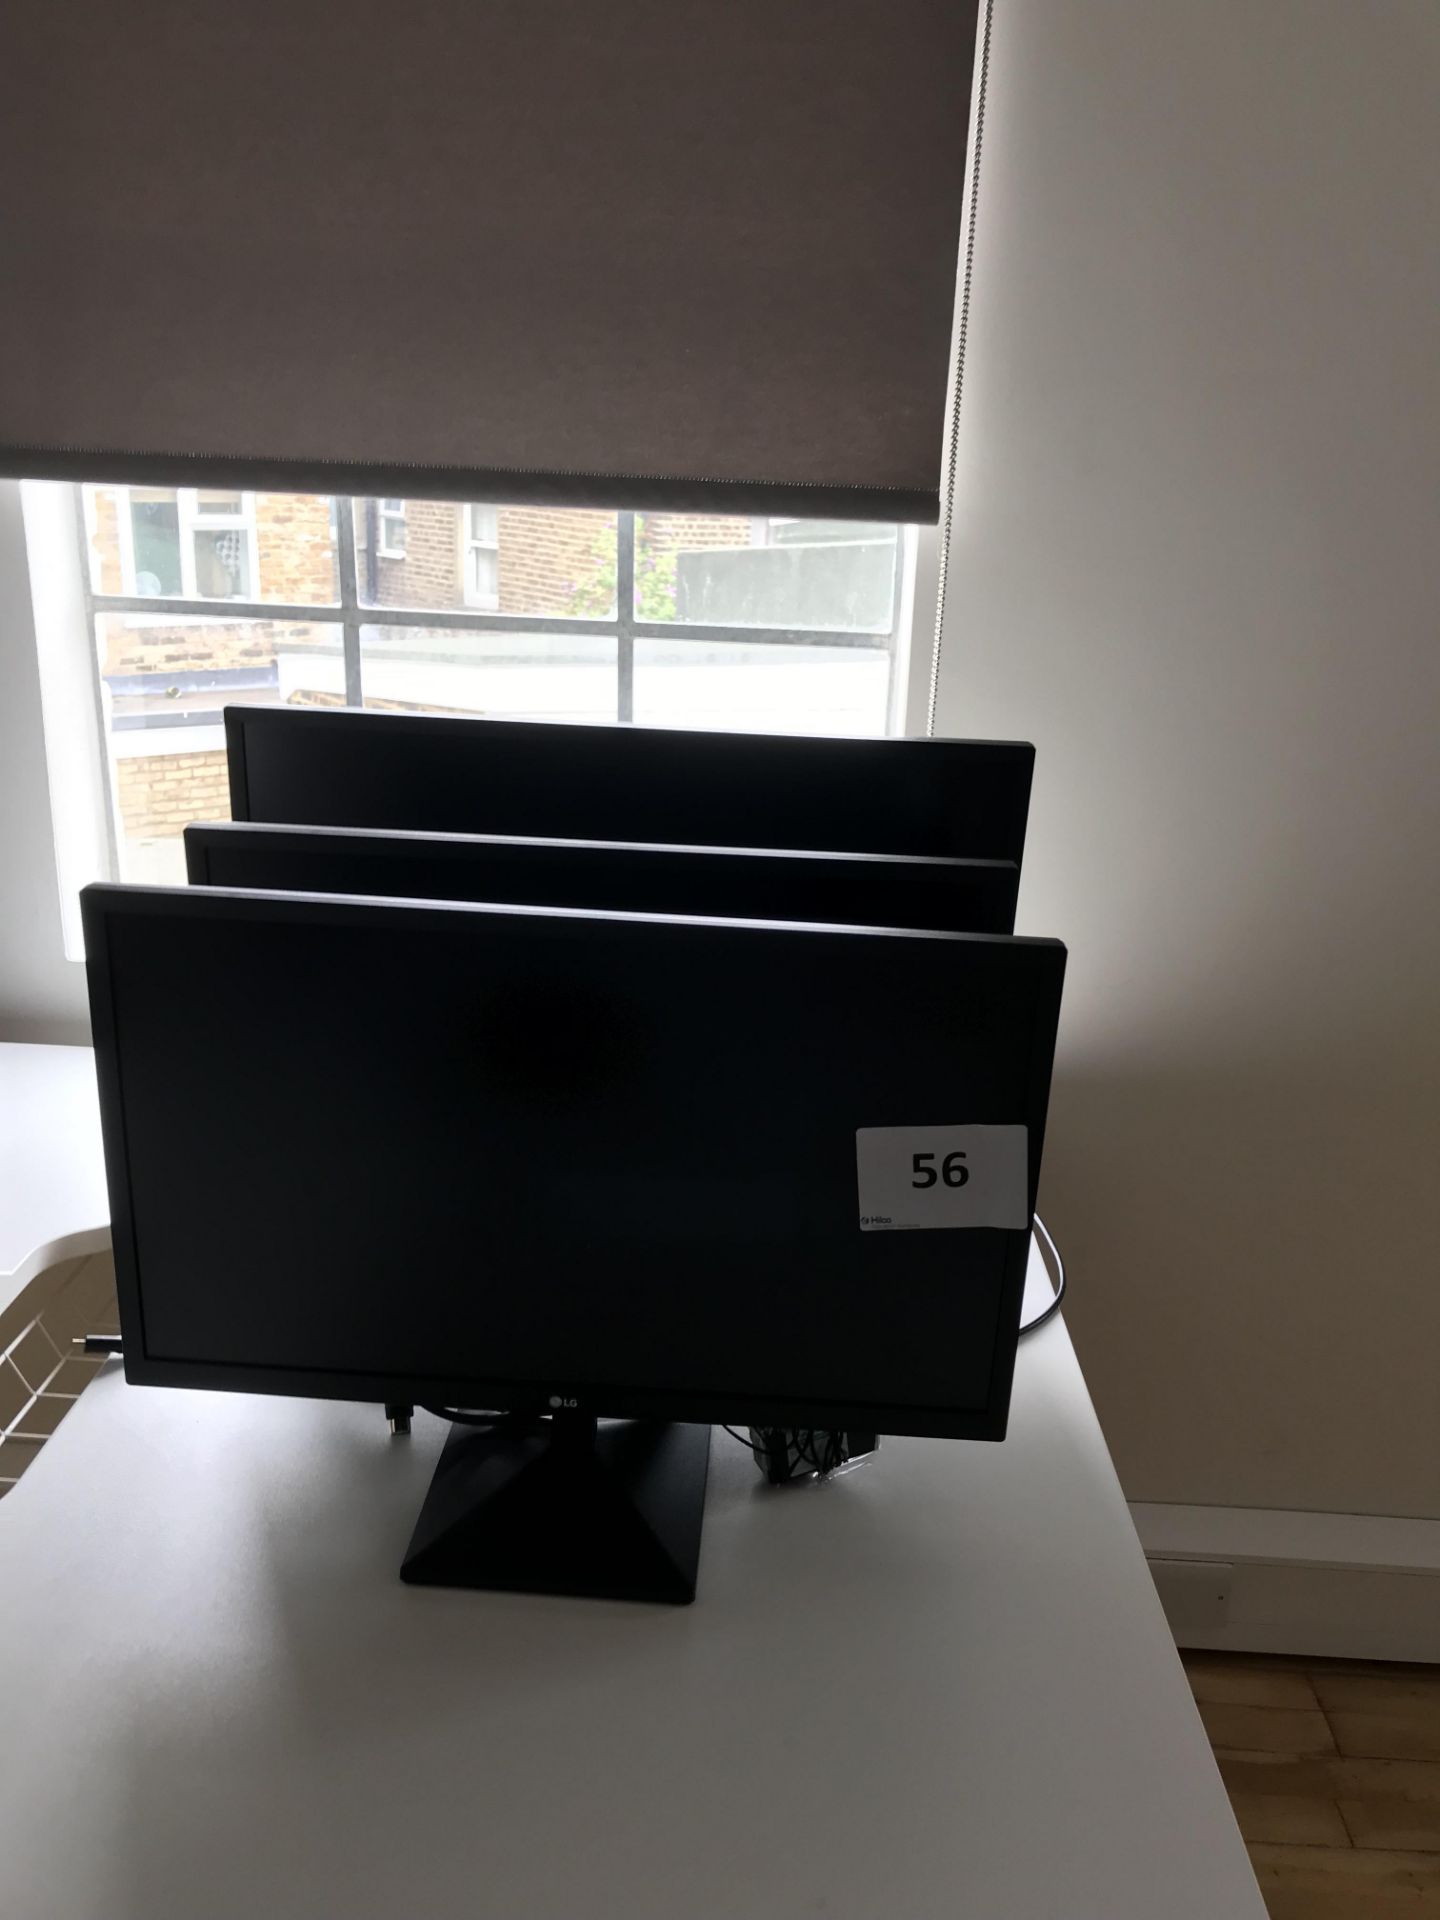 3, LG Monitors Including (2) 24MK430H and (1) 27MK430N, As Lotted